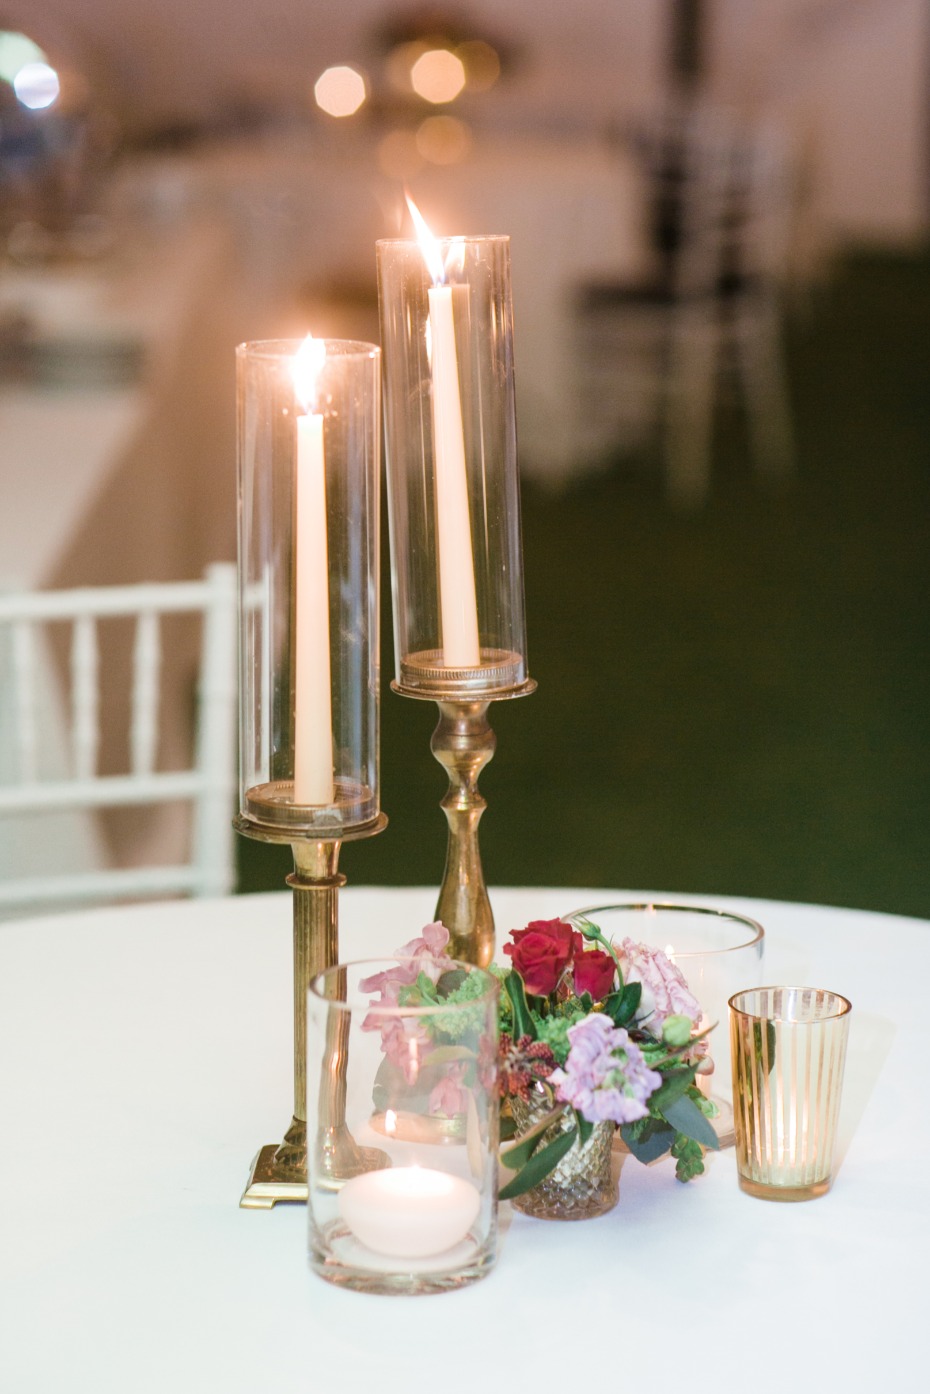 Simple yet elegant centerpiece with candles and florals